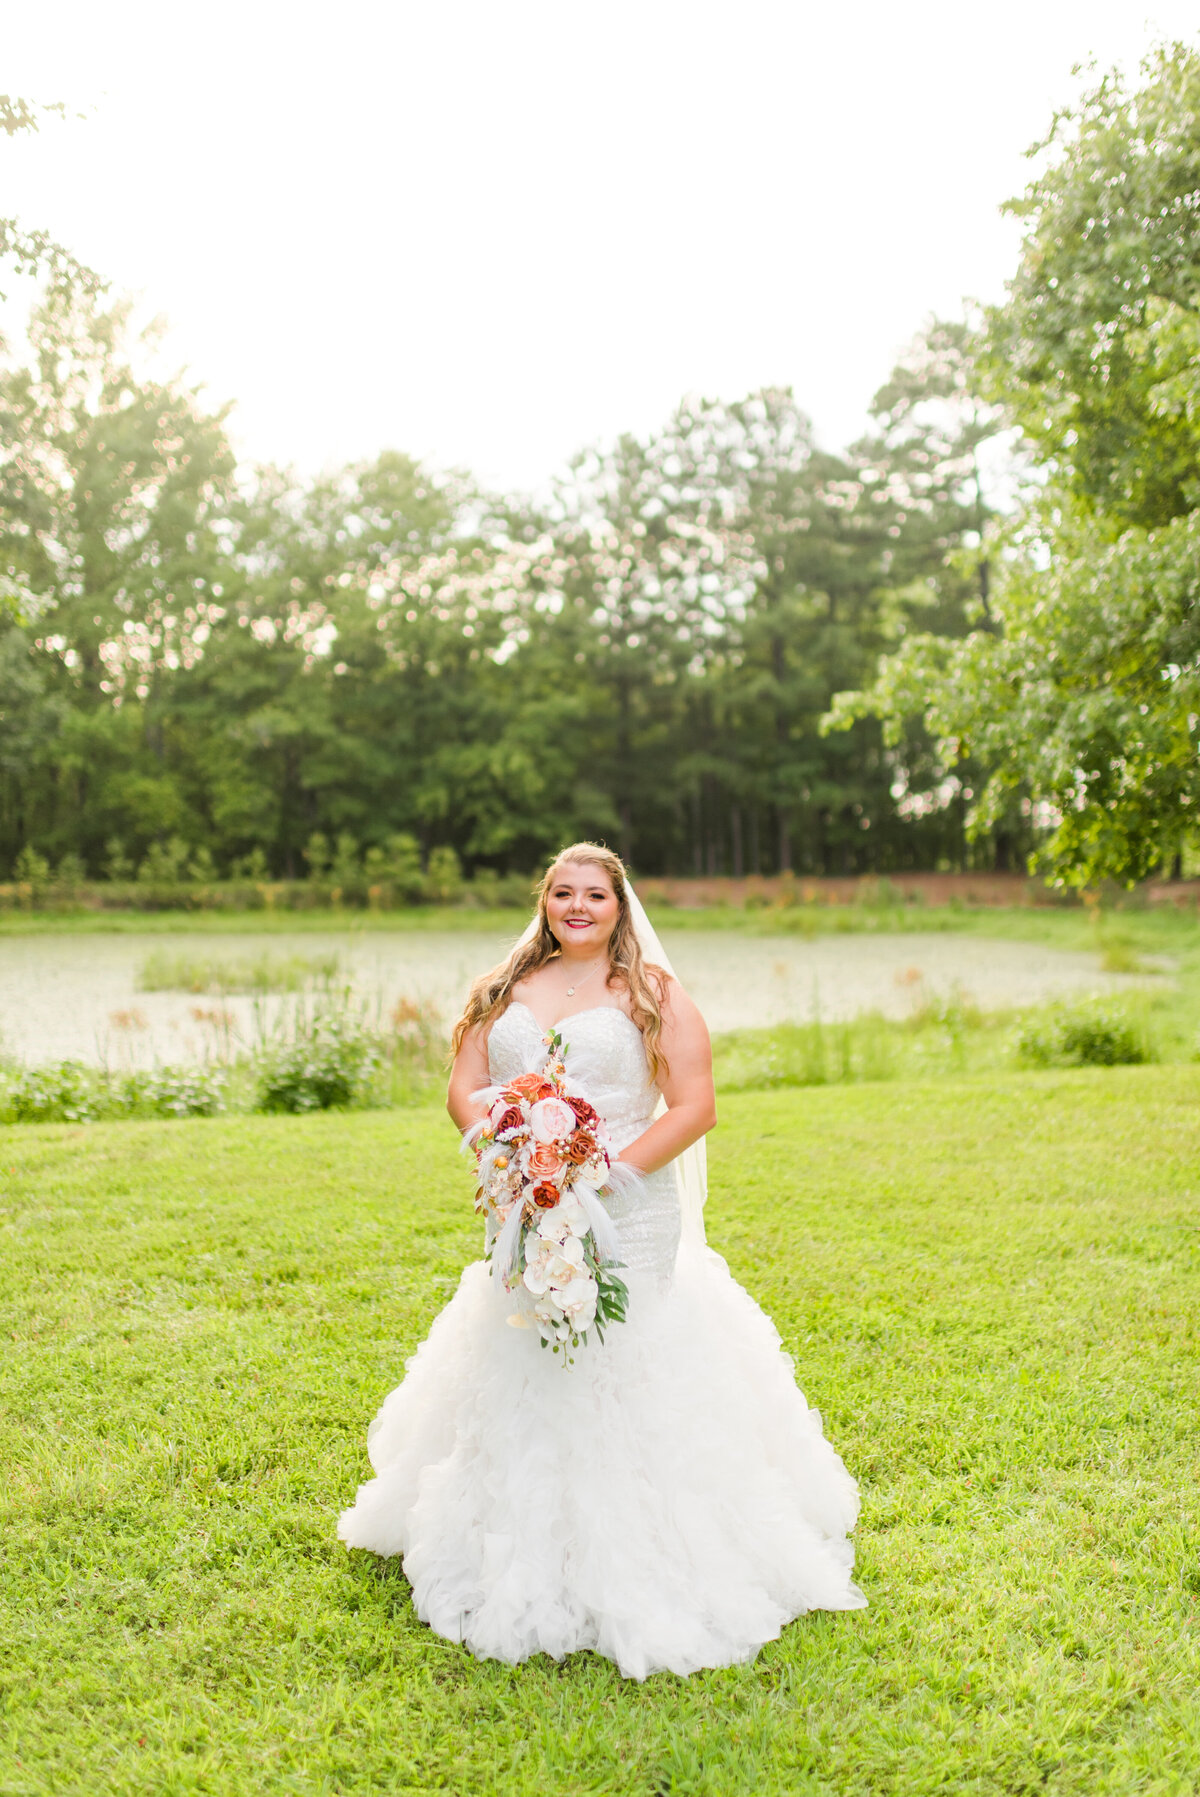 Brittany Overby's Bridals - Photography by Gerri Anna-1